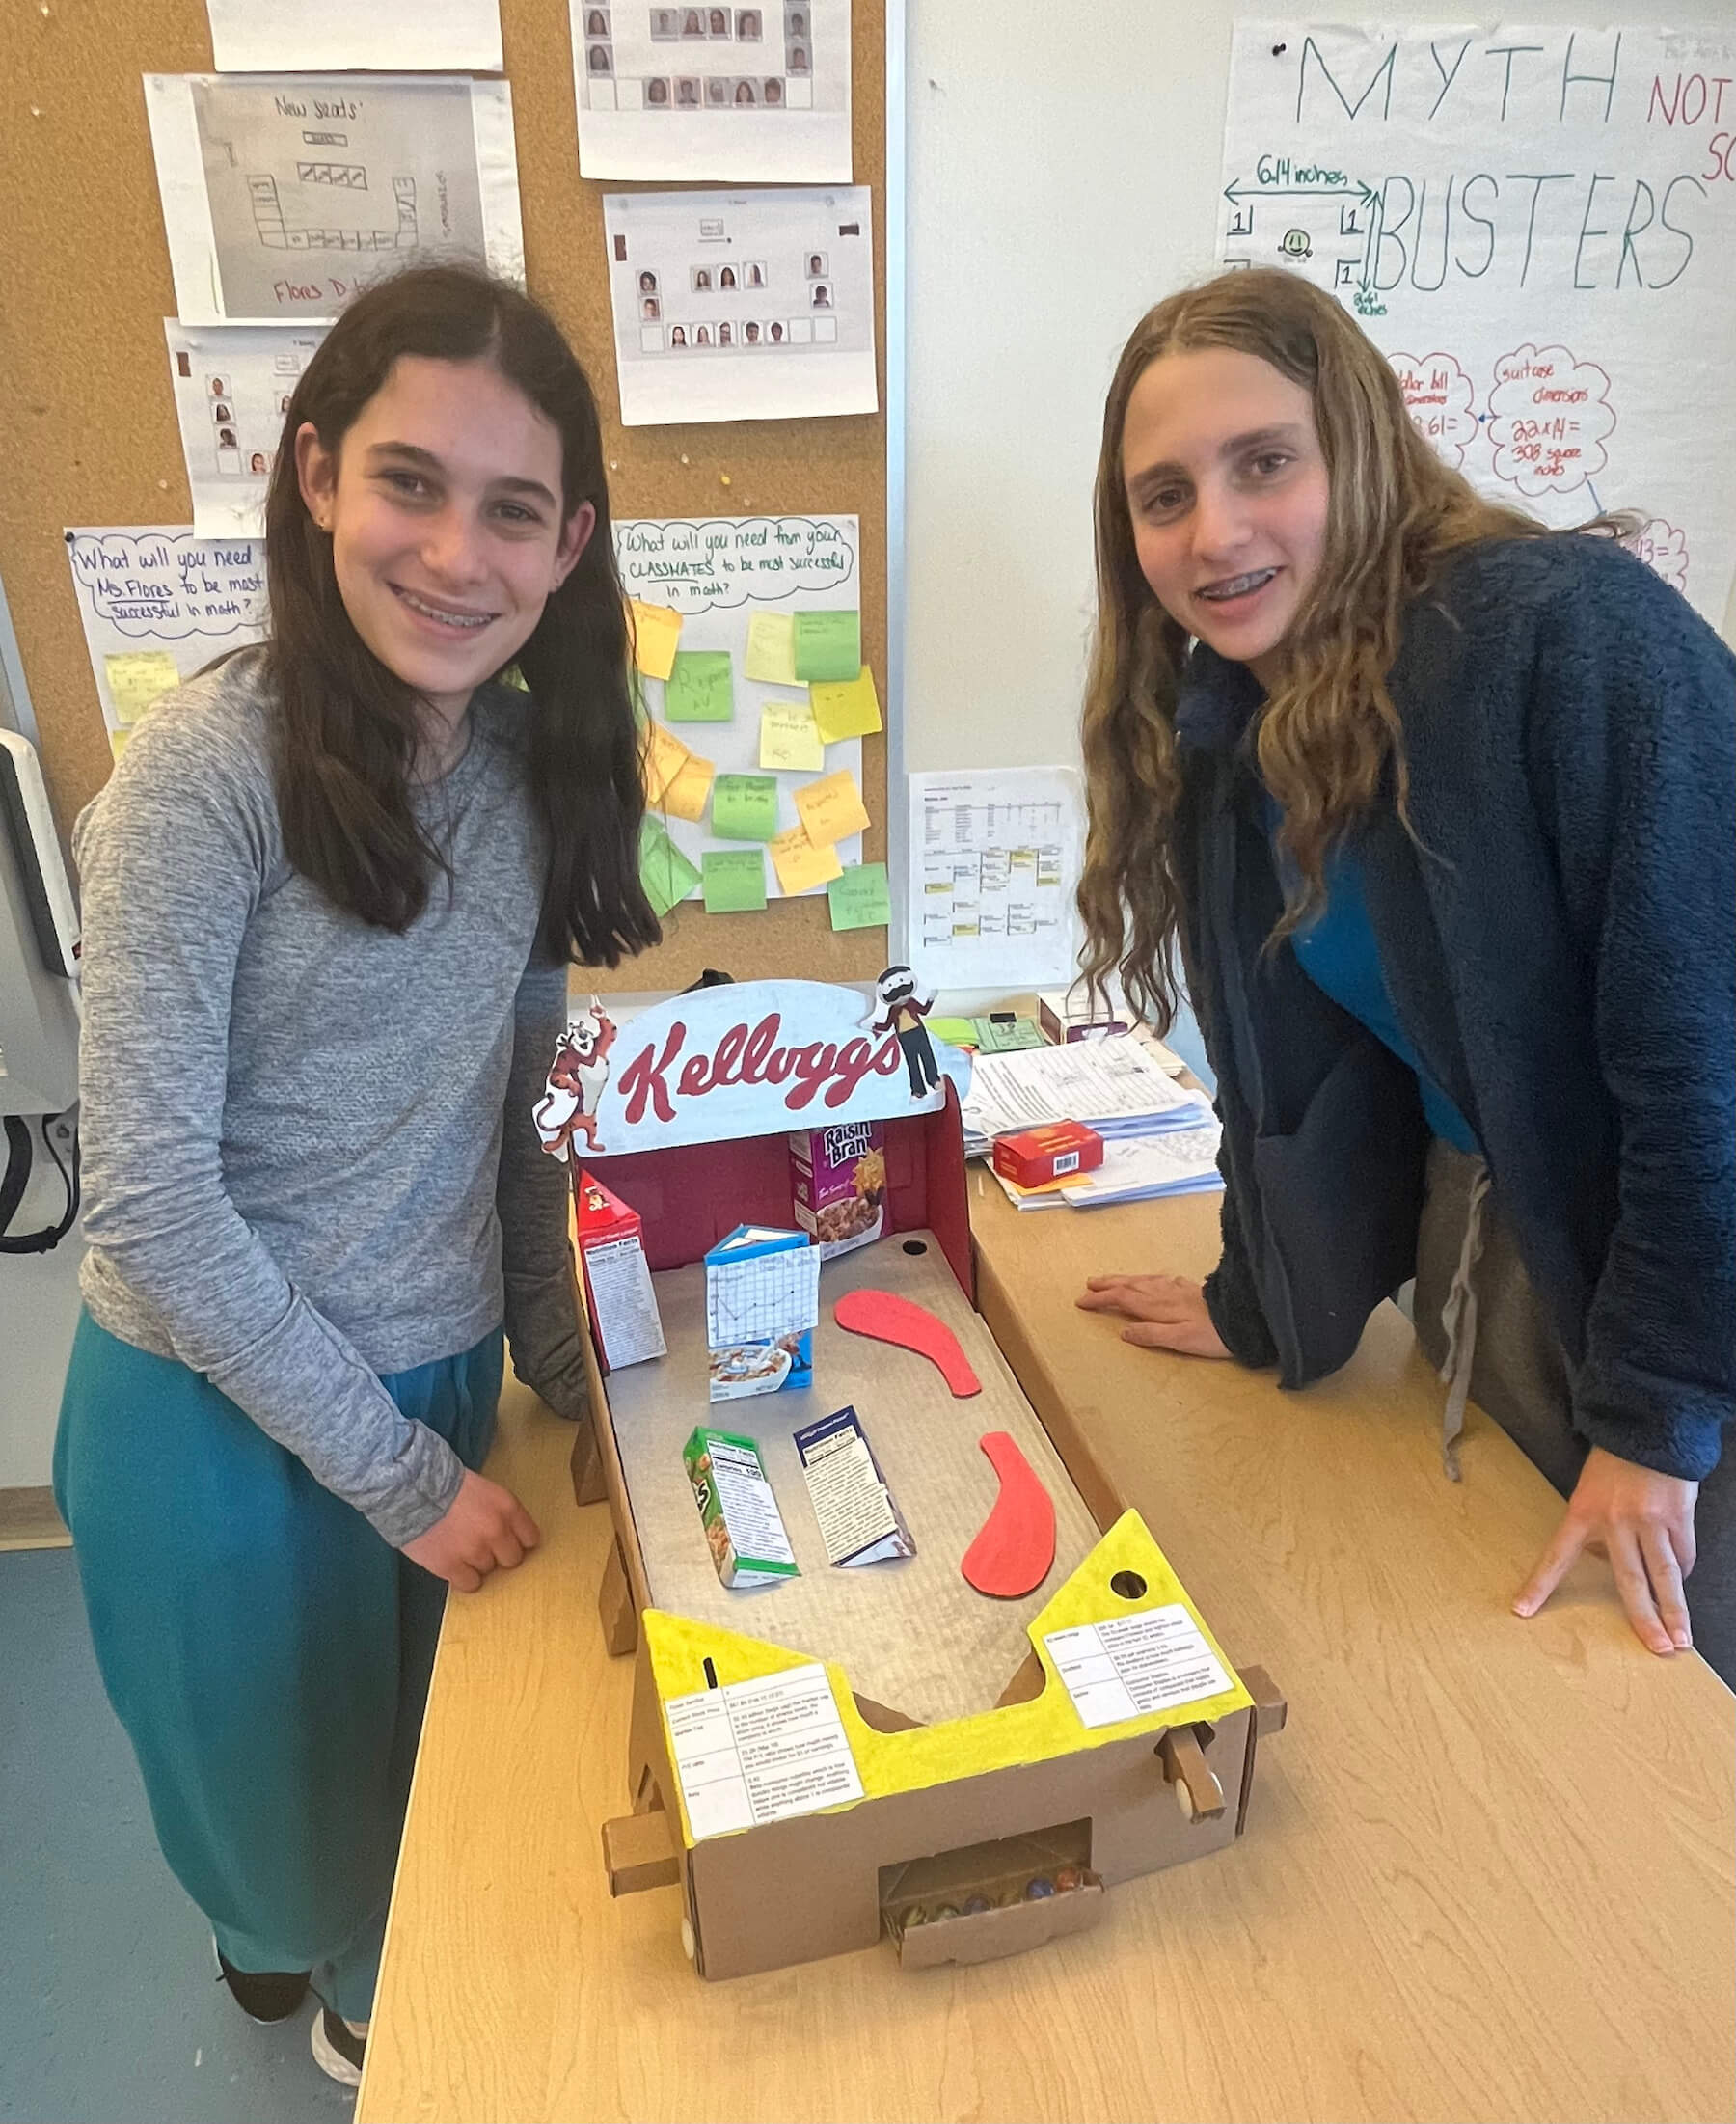 Two Ethical Culture Fieldston 6th Grade students present their project to the class.